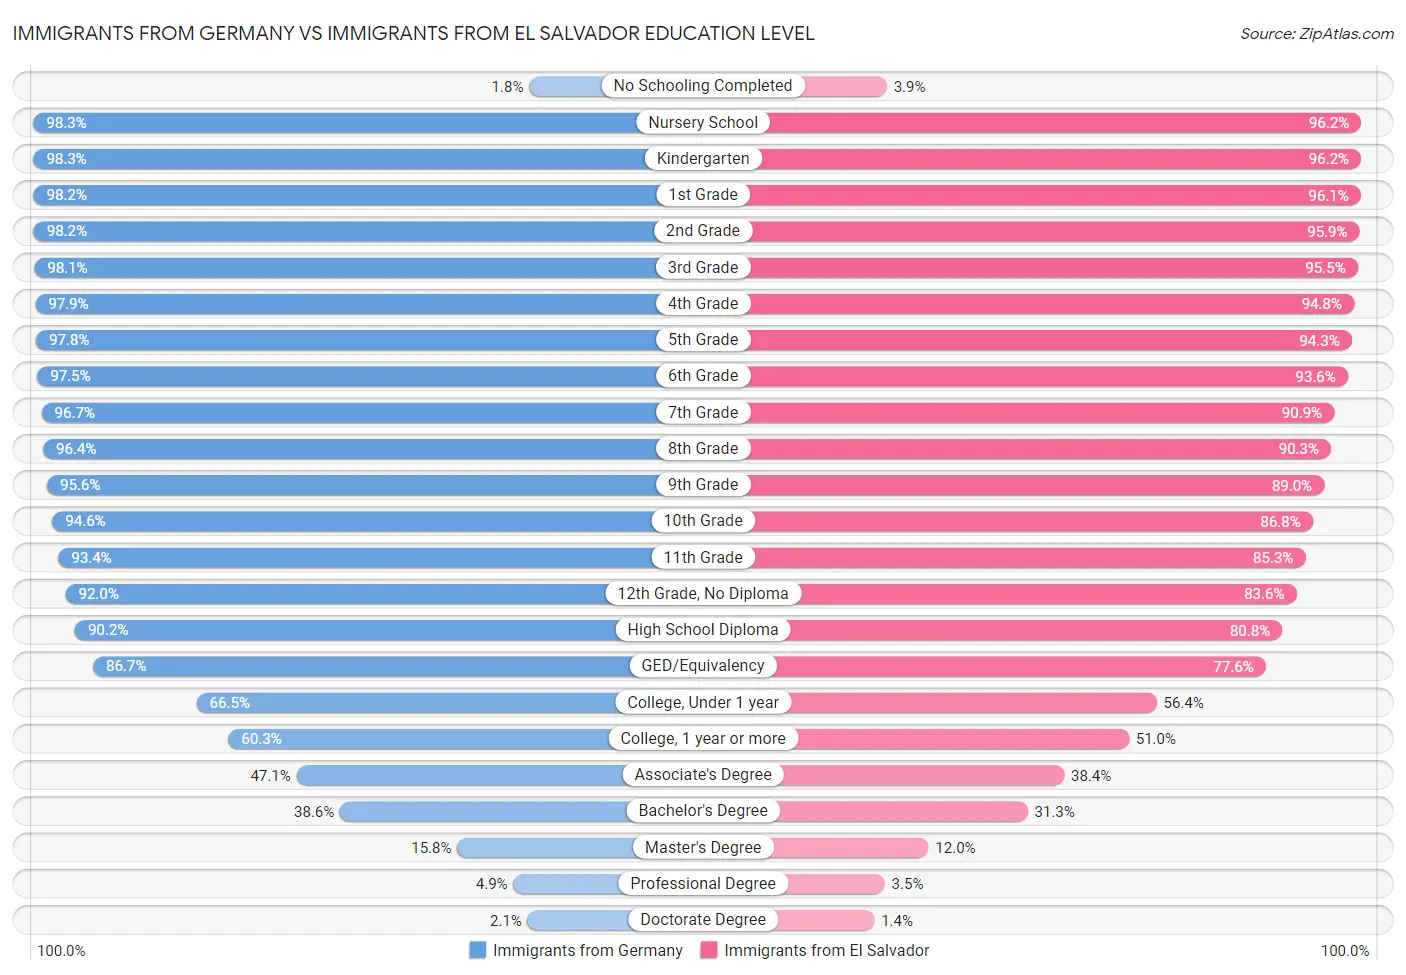 Immigrants from Germany vs Immigrants from El Salvador Education Level